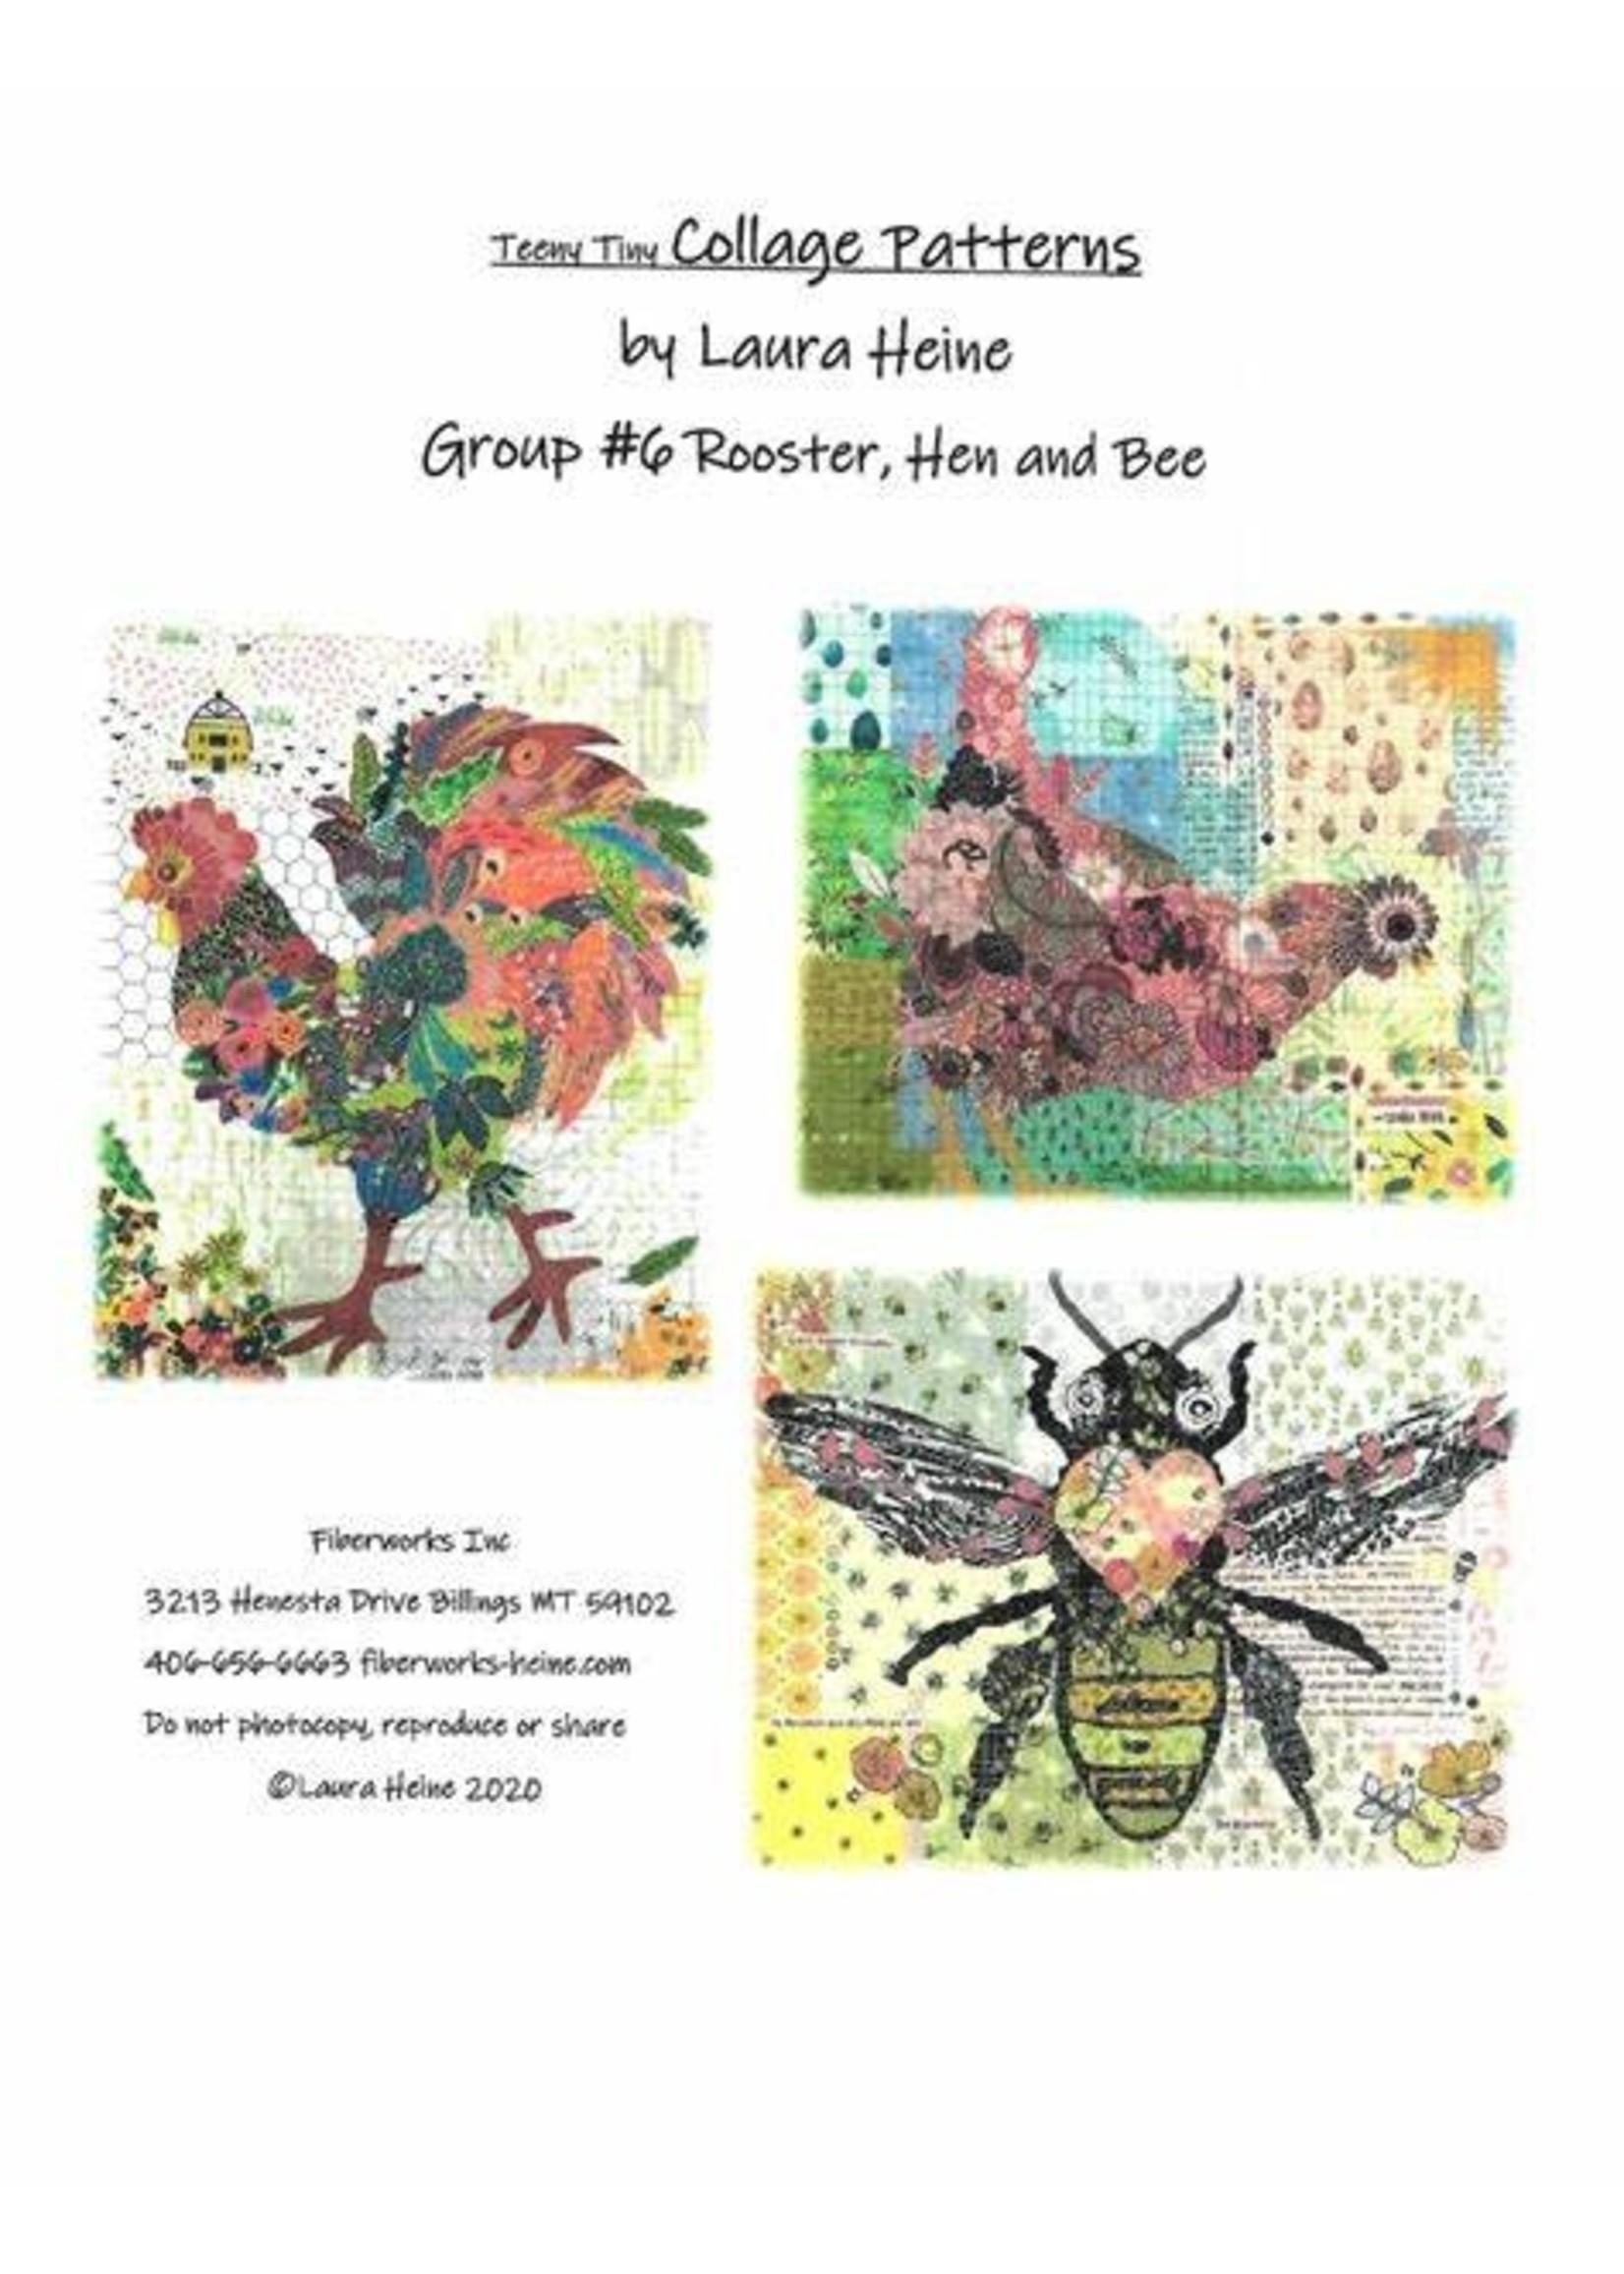 Laura Heine Patroon Collage - Groep #6 - Rooster, Hen and Bee